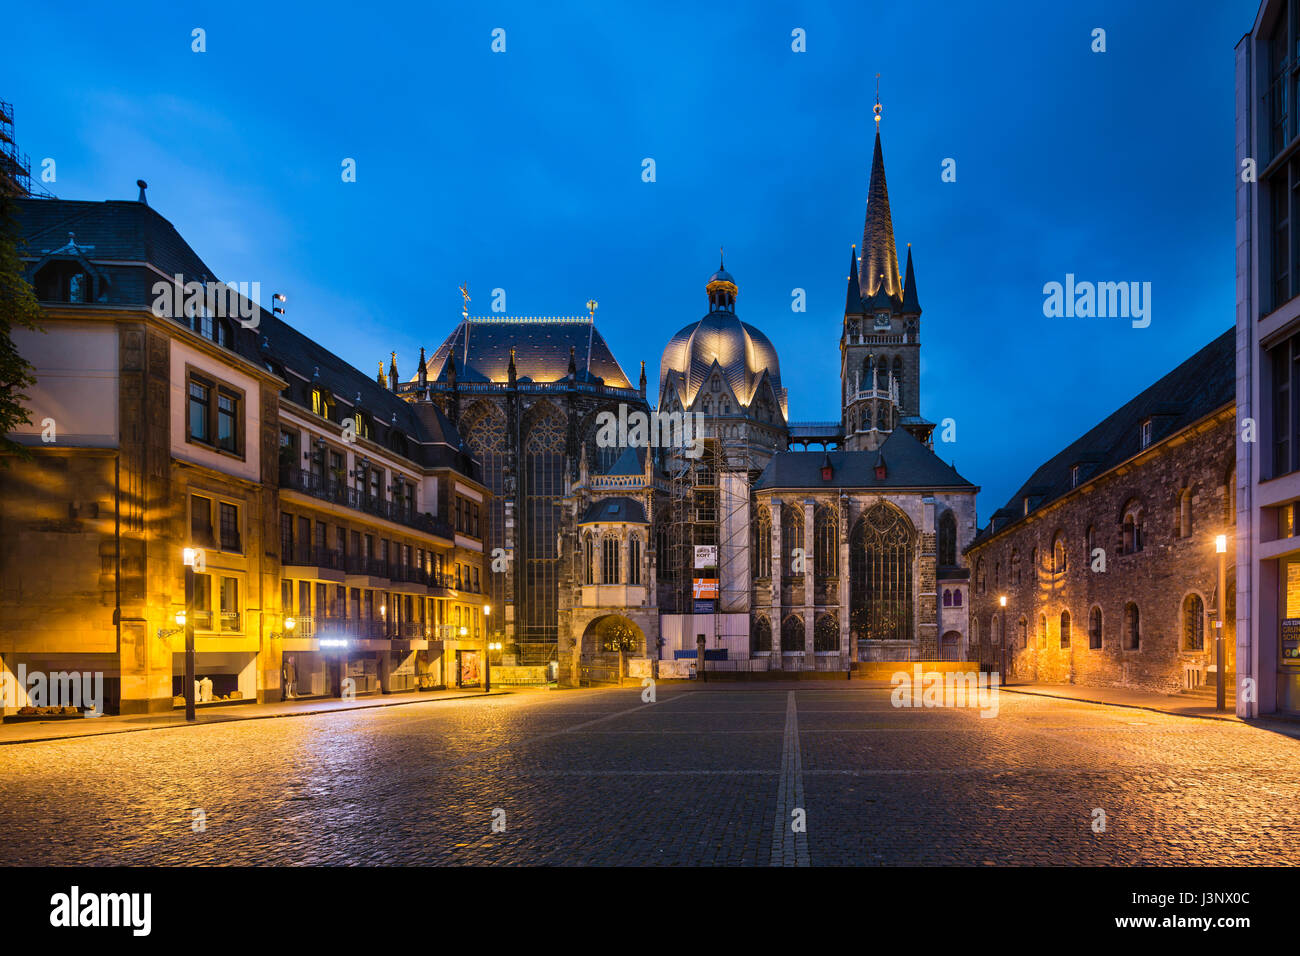 AACHEN - JULY 26: The famous cathedral of Aachen, Germany with night blue sky seen from the Katschhof on July 26, 2016. Stock Photo